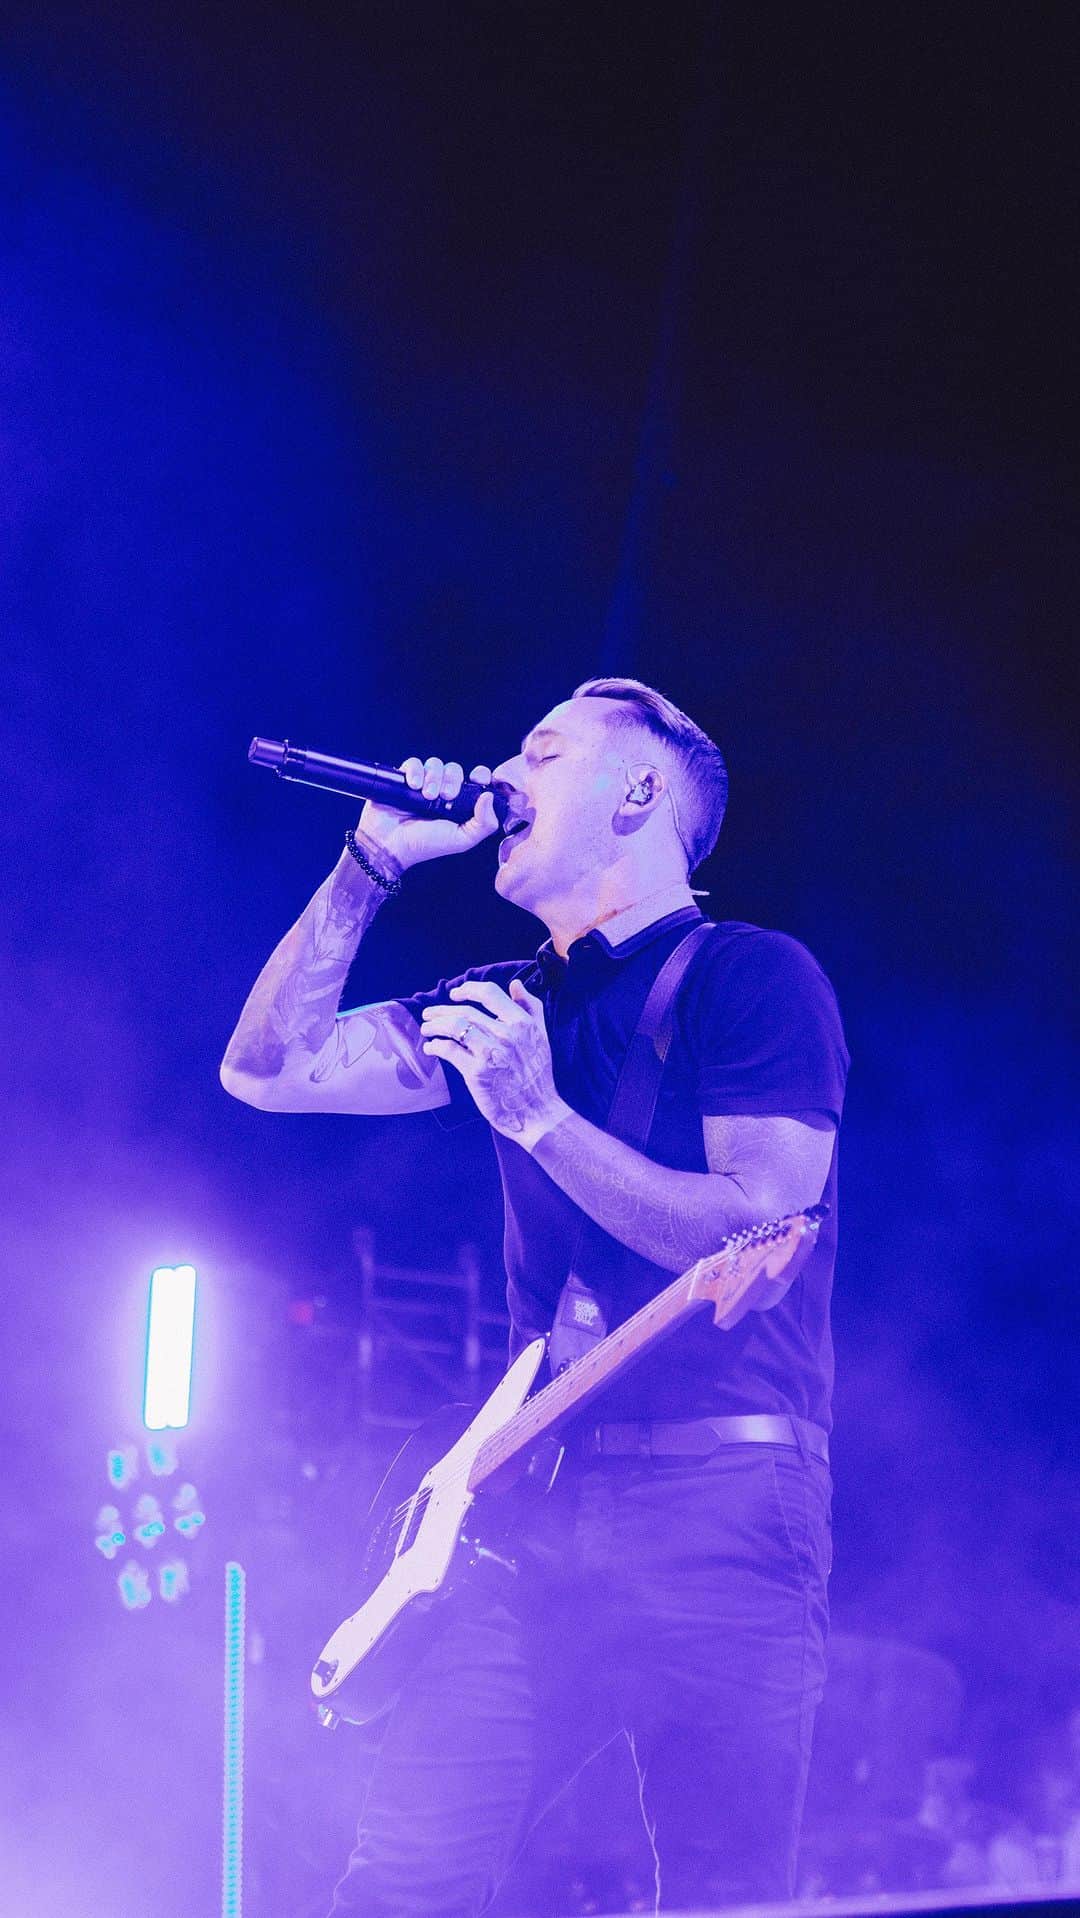 Yellowcardのインスタグラム：「It’s only Tuesday, but we can’t stop thinking about how much we’re looking forward to @whenwewereyoungfest this weekend! Who are you most excited about seeing? If you’re not going, who would you want to see if you were there? @williamryankey says “I’m most looking forward to watching Blink 182 and Green Day play 2 hour sets each night.”  • • • 🎥 @acaciaevans  #yellowcard #yellowcardband #poppunk #emo #elderemo #whenwewereyoung #musicfestival」